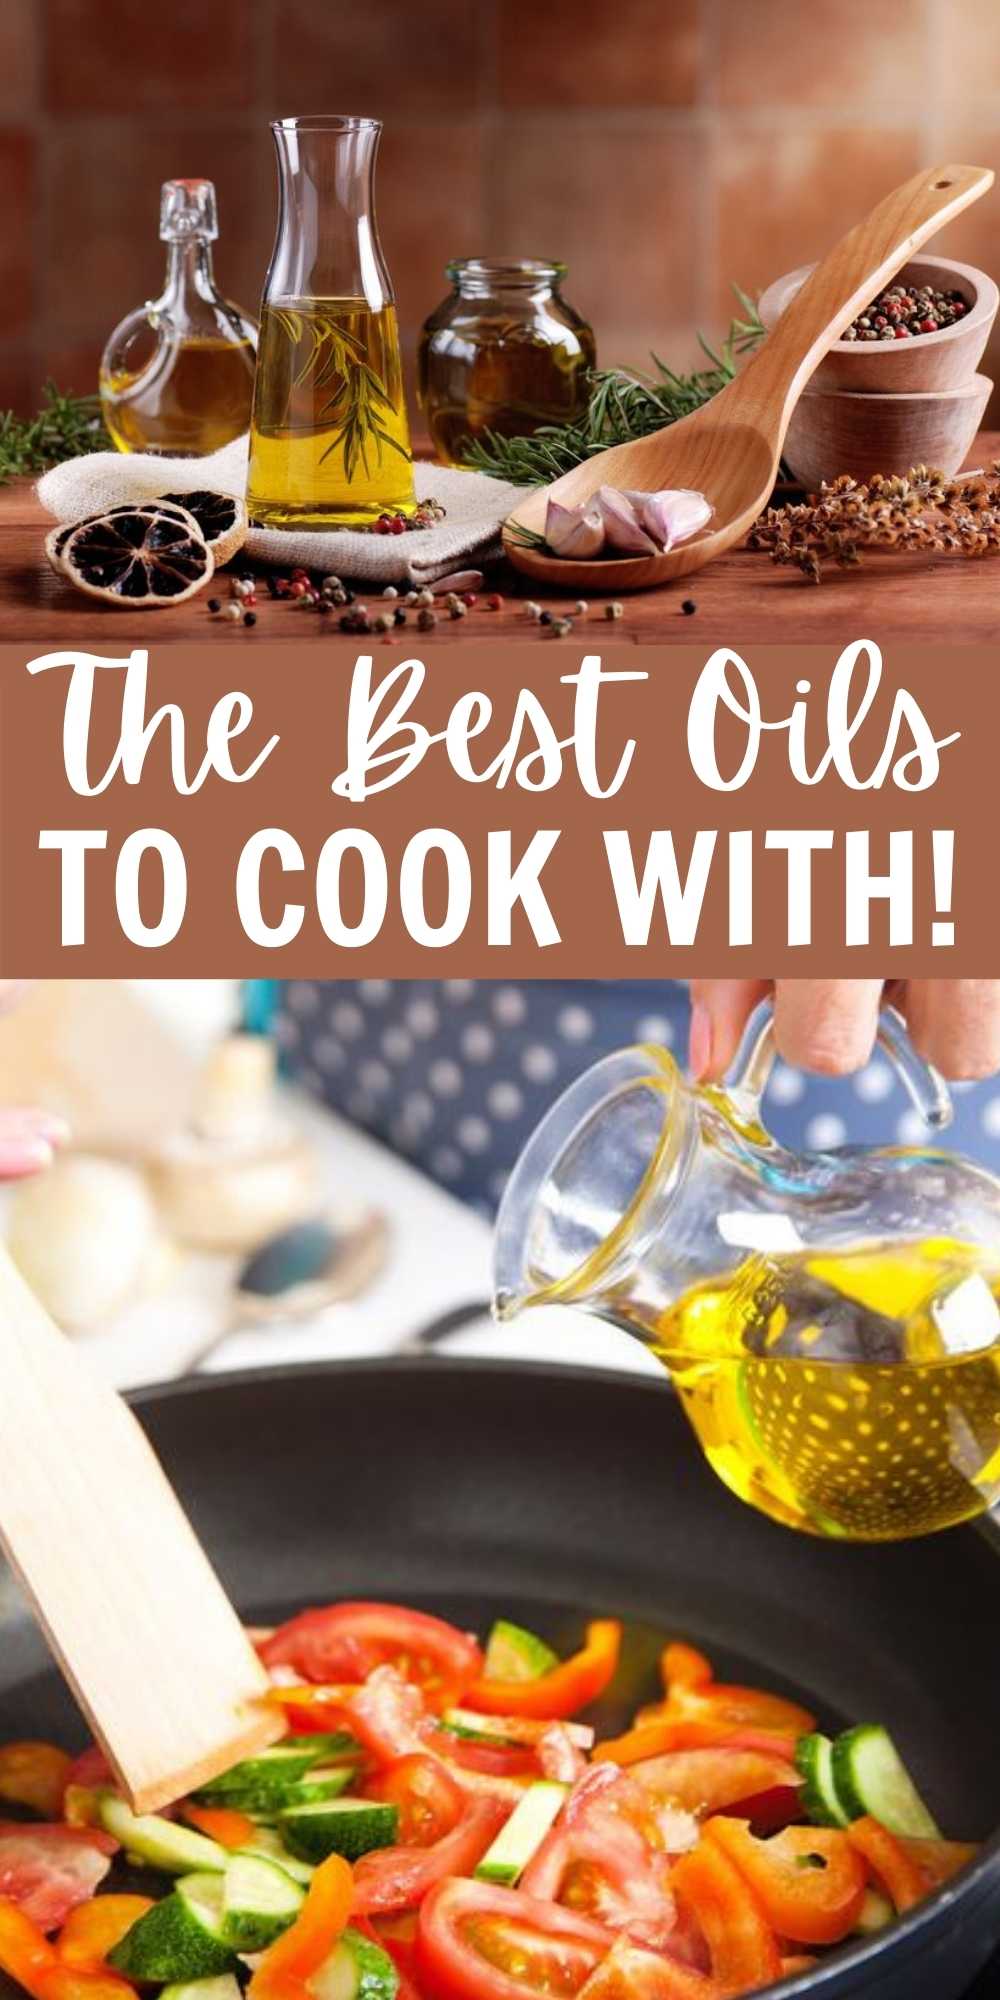 Knowing the best oil to cook with will help you make the tastiest and healthiest dinners. Learn which oil is be best for high heat cooking and which ones shouldn’t be used in cooking at all! Plus all the health benefits of all the different types of oil.  #eatingonadime #cookingtips #kitchentips #cookingoils #thebestcookingoils 
